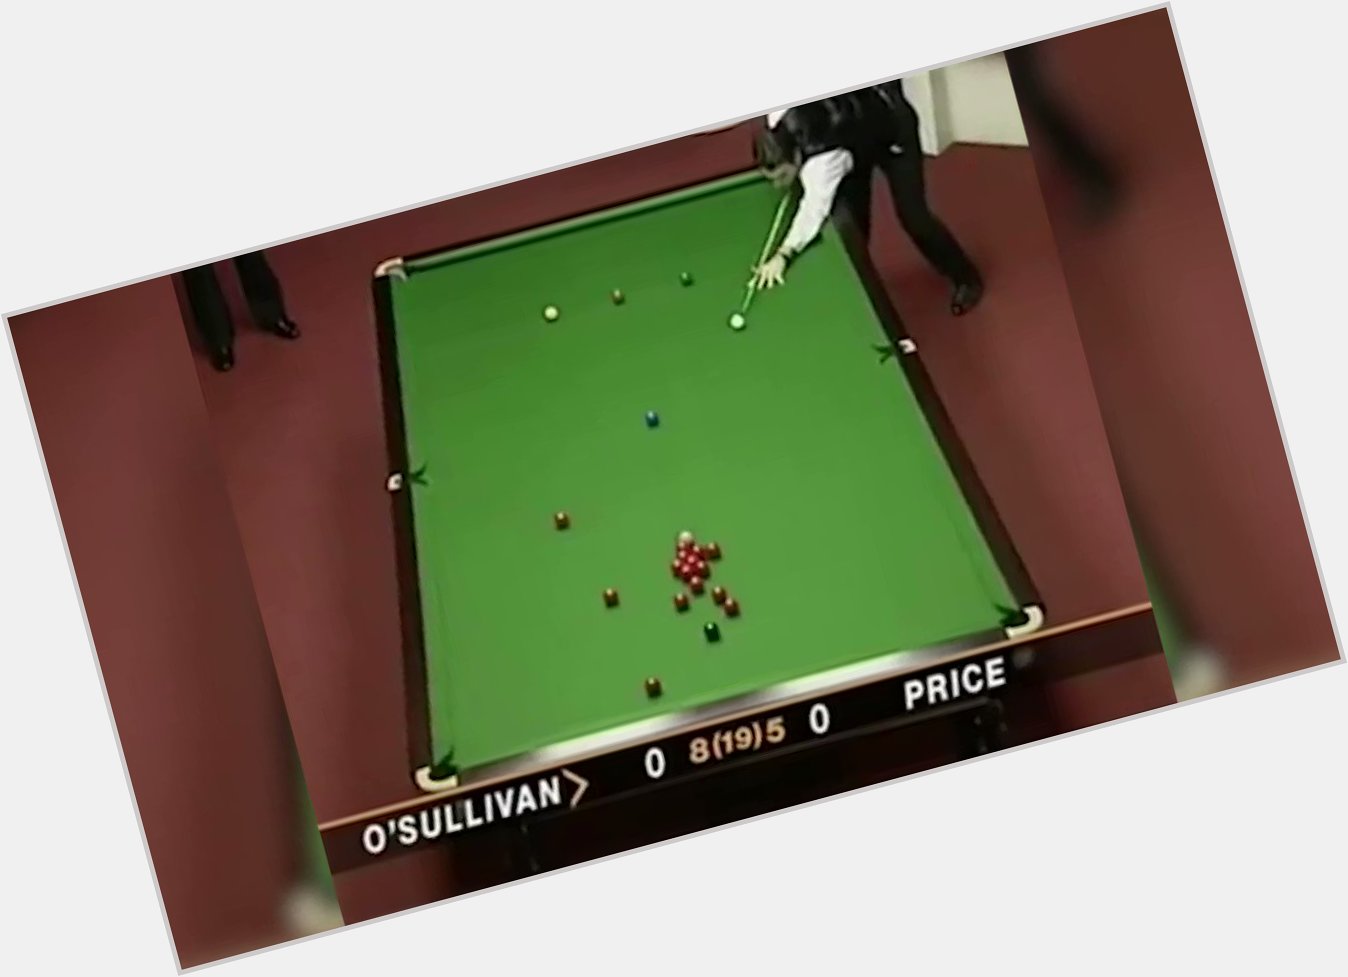  Happy birthday to the legend that is Ronnie O\Sullivan

Here\s his first ever 147 break!

R O C K E T 